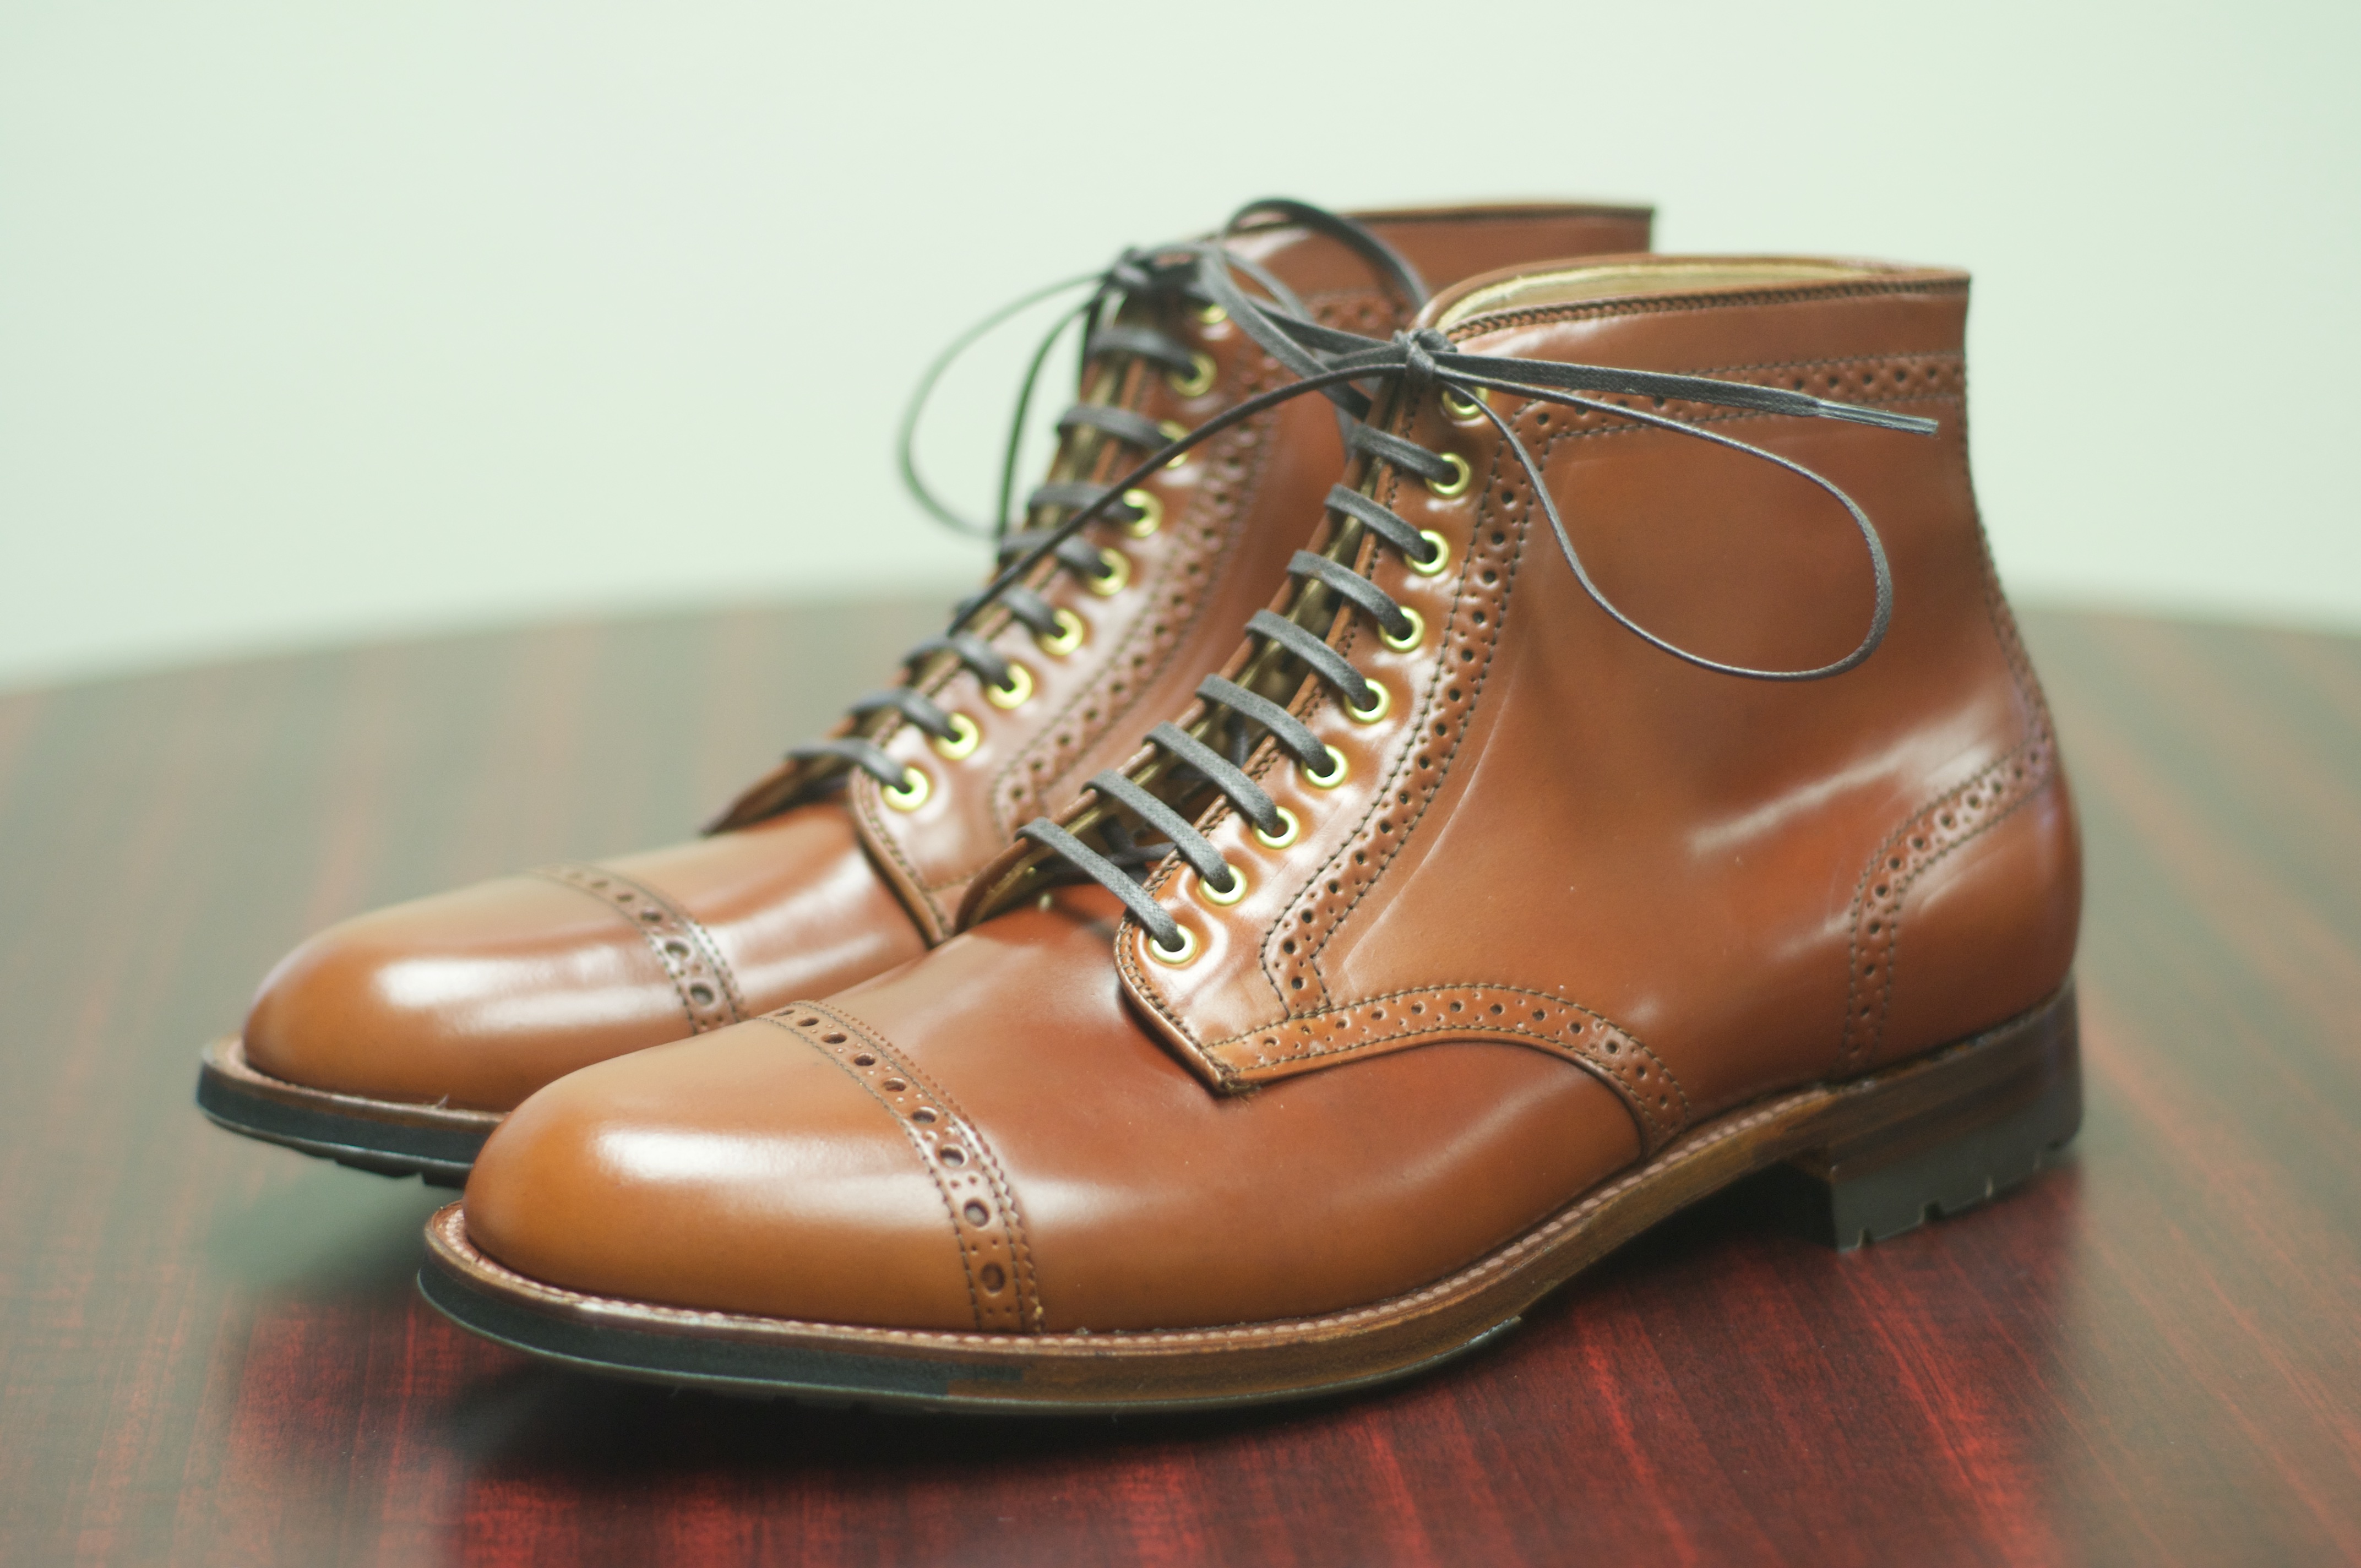 shell cordovan shoes sale